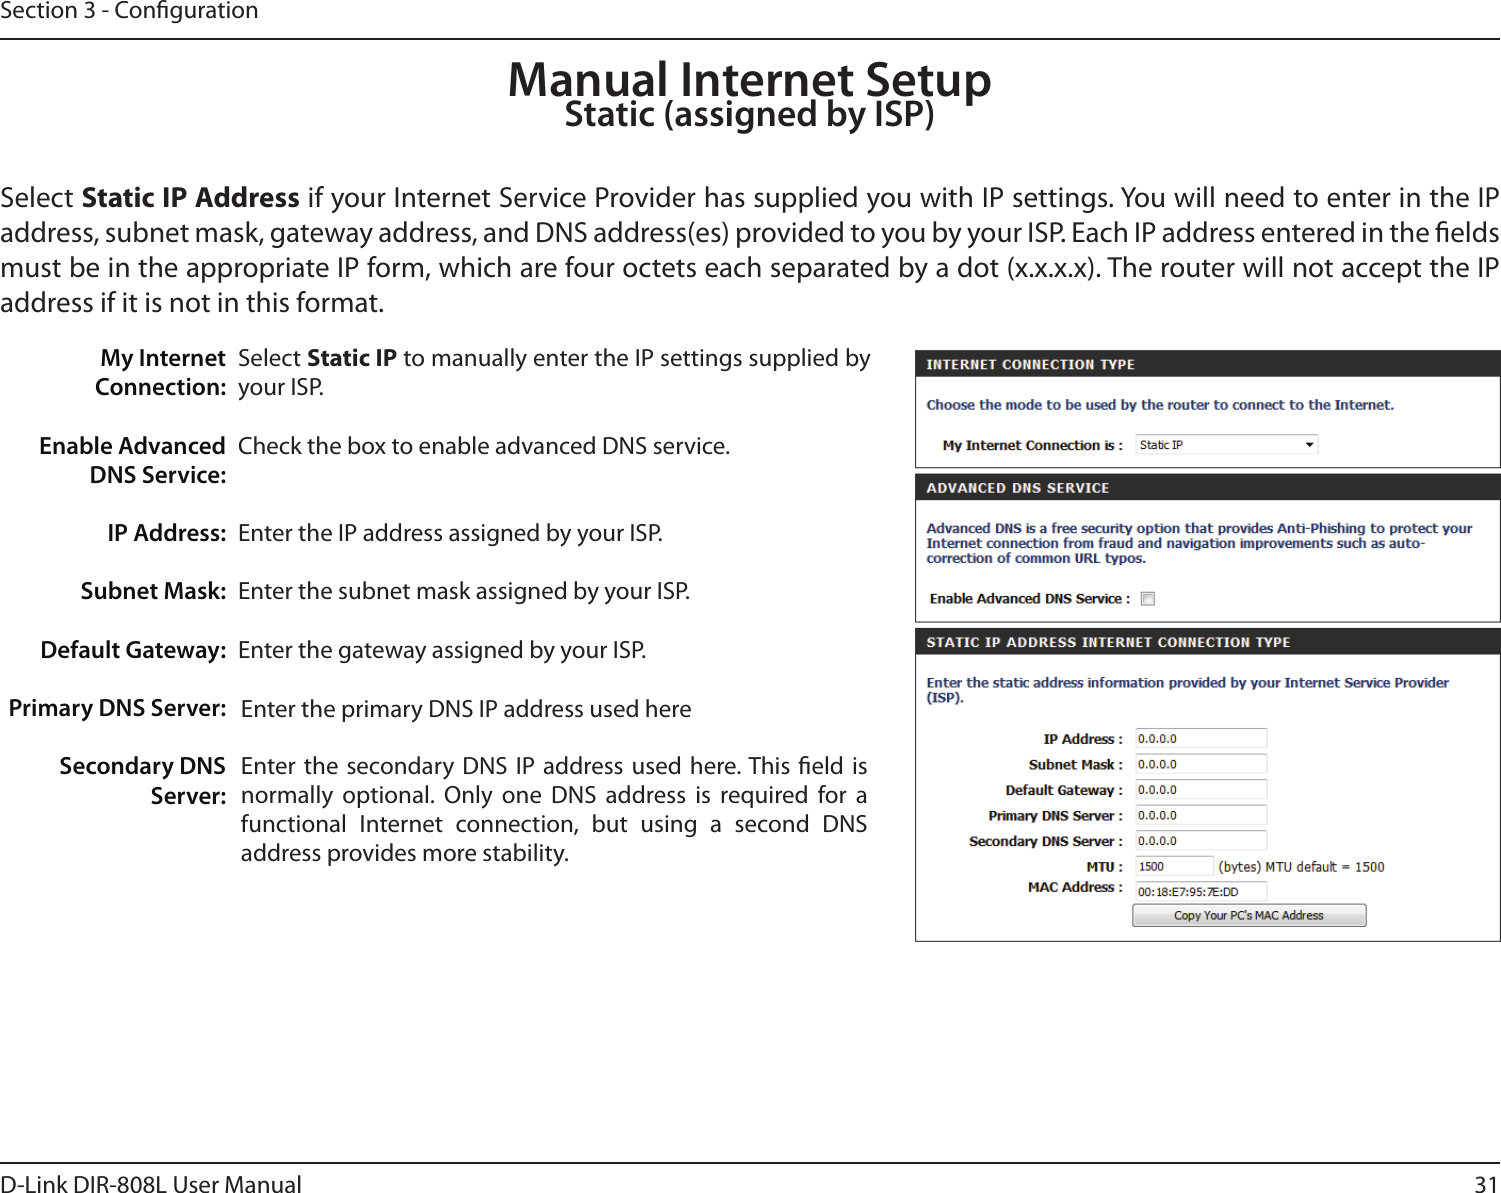 31D-Link DIR-808L User ManualSection 3 - CongurationSelect Static IP to manually enter the IP settings supplied by your ISP.Check the box to enable advanced DNS service.Enter the IP address assigned by your ISP.Enter the subnet mask assigned by your ISP.Enter the gateway assigned by your ISP.  Enter the primary DNS IP address used hereEnter the secondary  DNS  IP  address used  here. This eld is normally  optional.  Only  one  DNS  address  is  required  for  a functional  Internet  connection,  but  using  a  second  DNS  address provides more stability.My Internet Connection:Enable Advanced DNS Service:IP Address:Subnet Mask:Default Gateway:Primary DNS Server:Secondary DNS Server:Manual Internet SetupStatic (assigned by ISP)Select Static IP Address if your Internet Service Provider has supplied you with IP settings. You will need to enter in the IP address, subnet mask, gateway address, and DNS address(es) provided to you by your ISP. Each IP address entered in the elds must be in the appropriate IP form, which are four octets each separated by a dot (x.x.x.x). The router will not accept the IP address if it is not in this format.